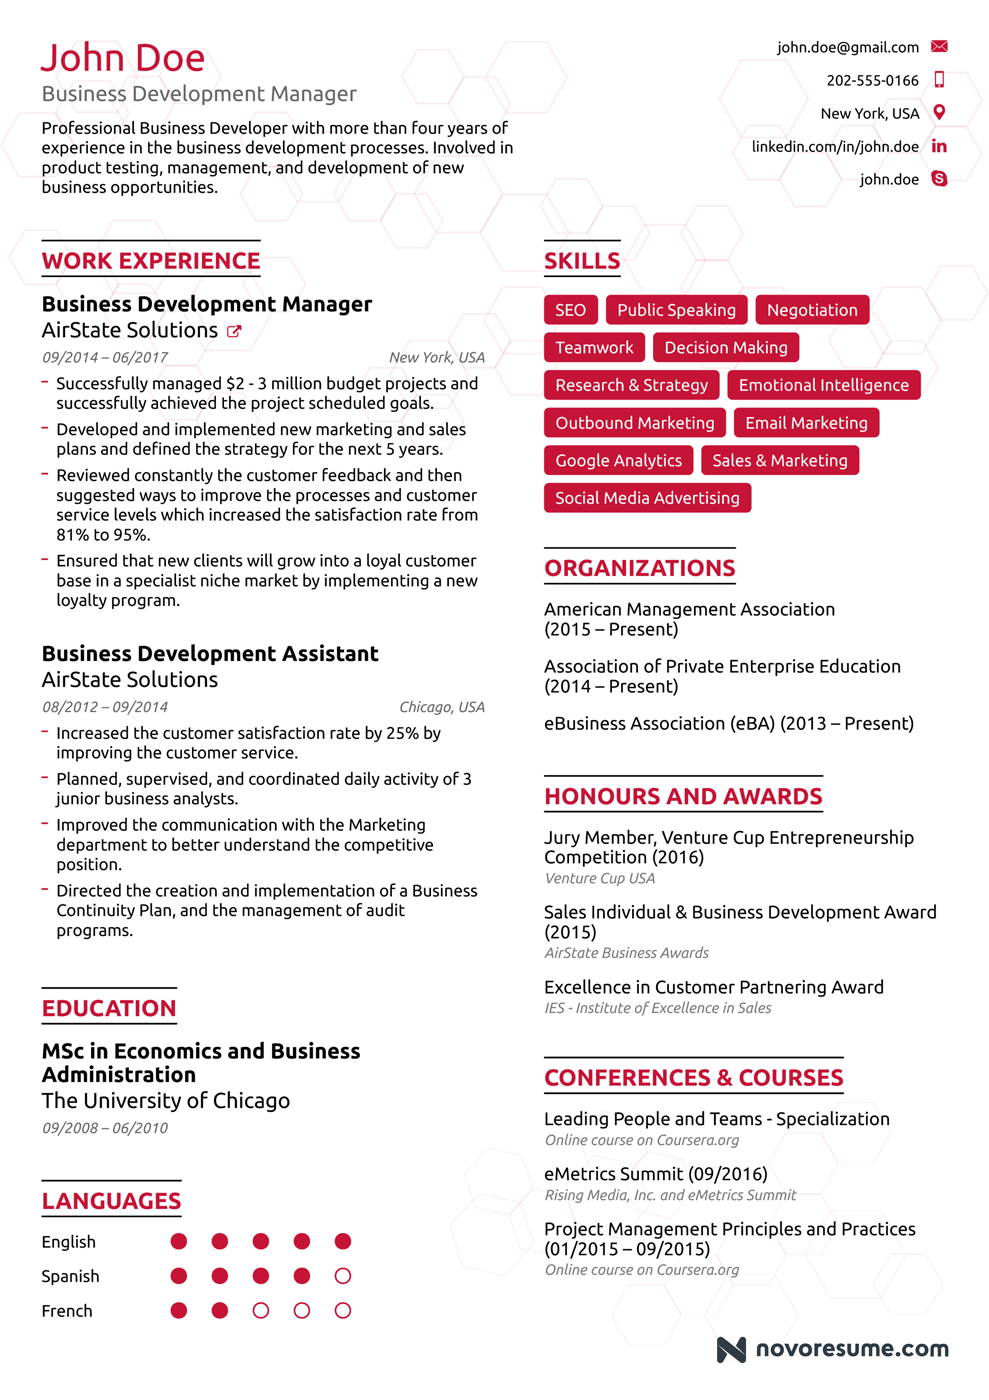 40+ Achievements to Write in Your Resume [2020 Examples]